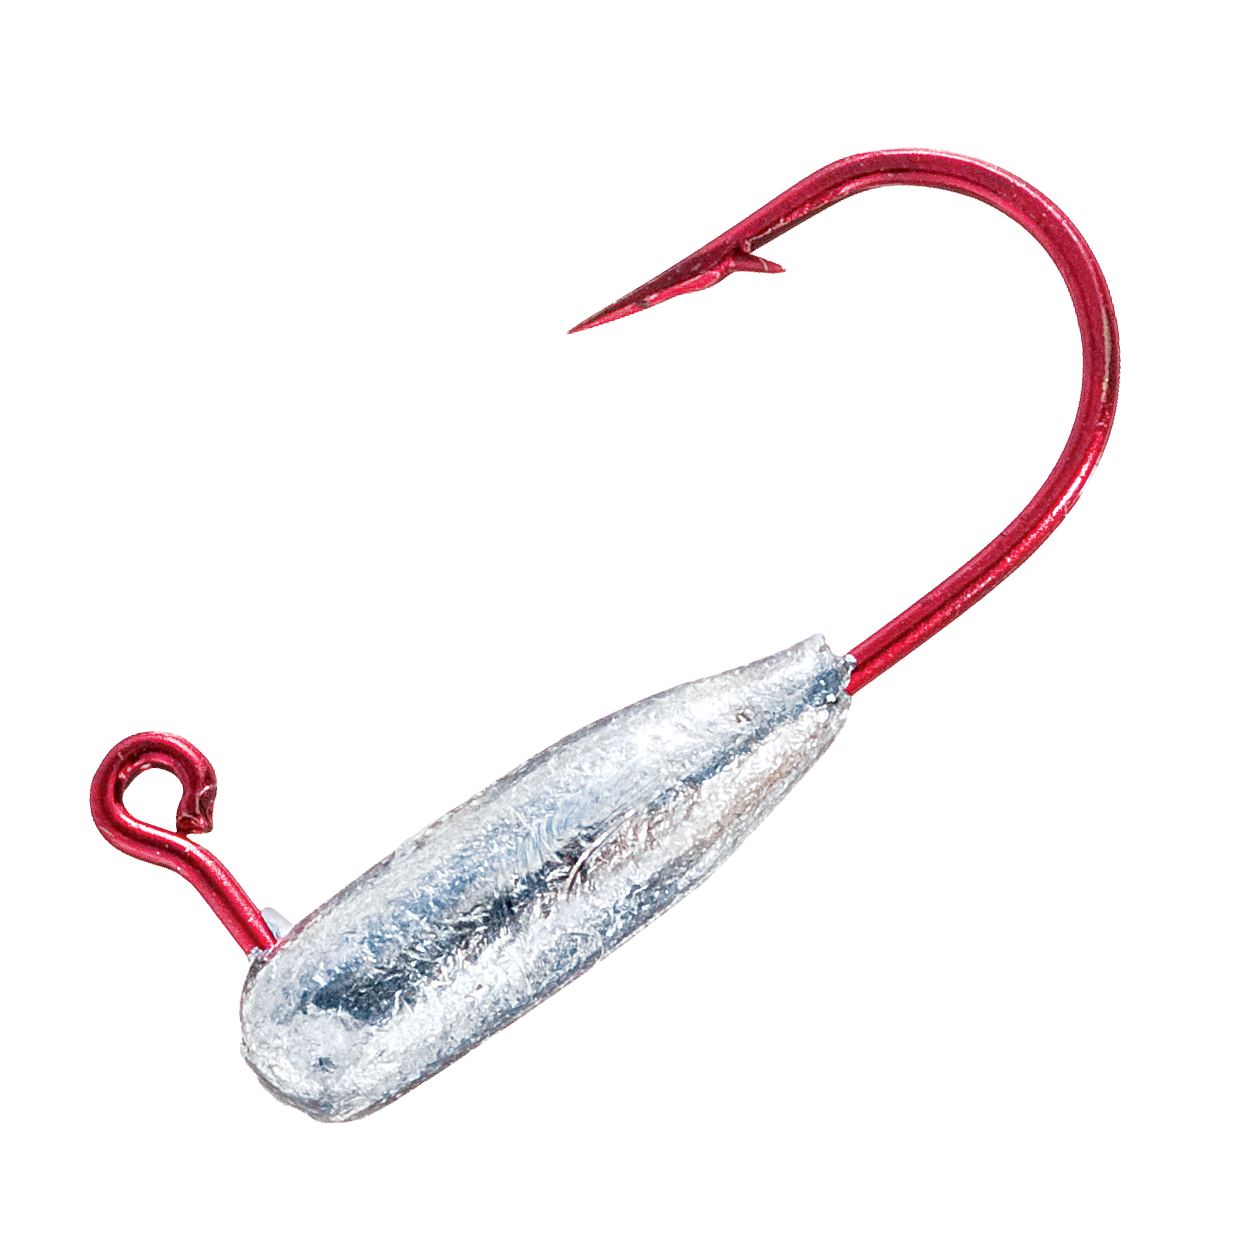 Bass Pro Shops Squirt Head with Red Hook Lead Heads